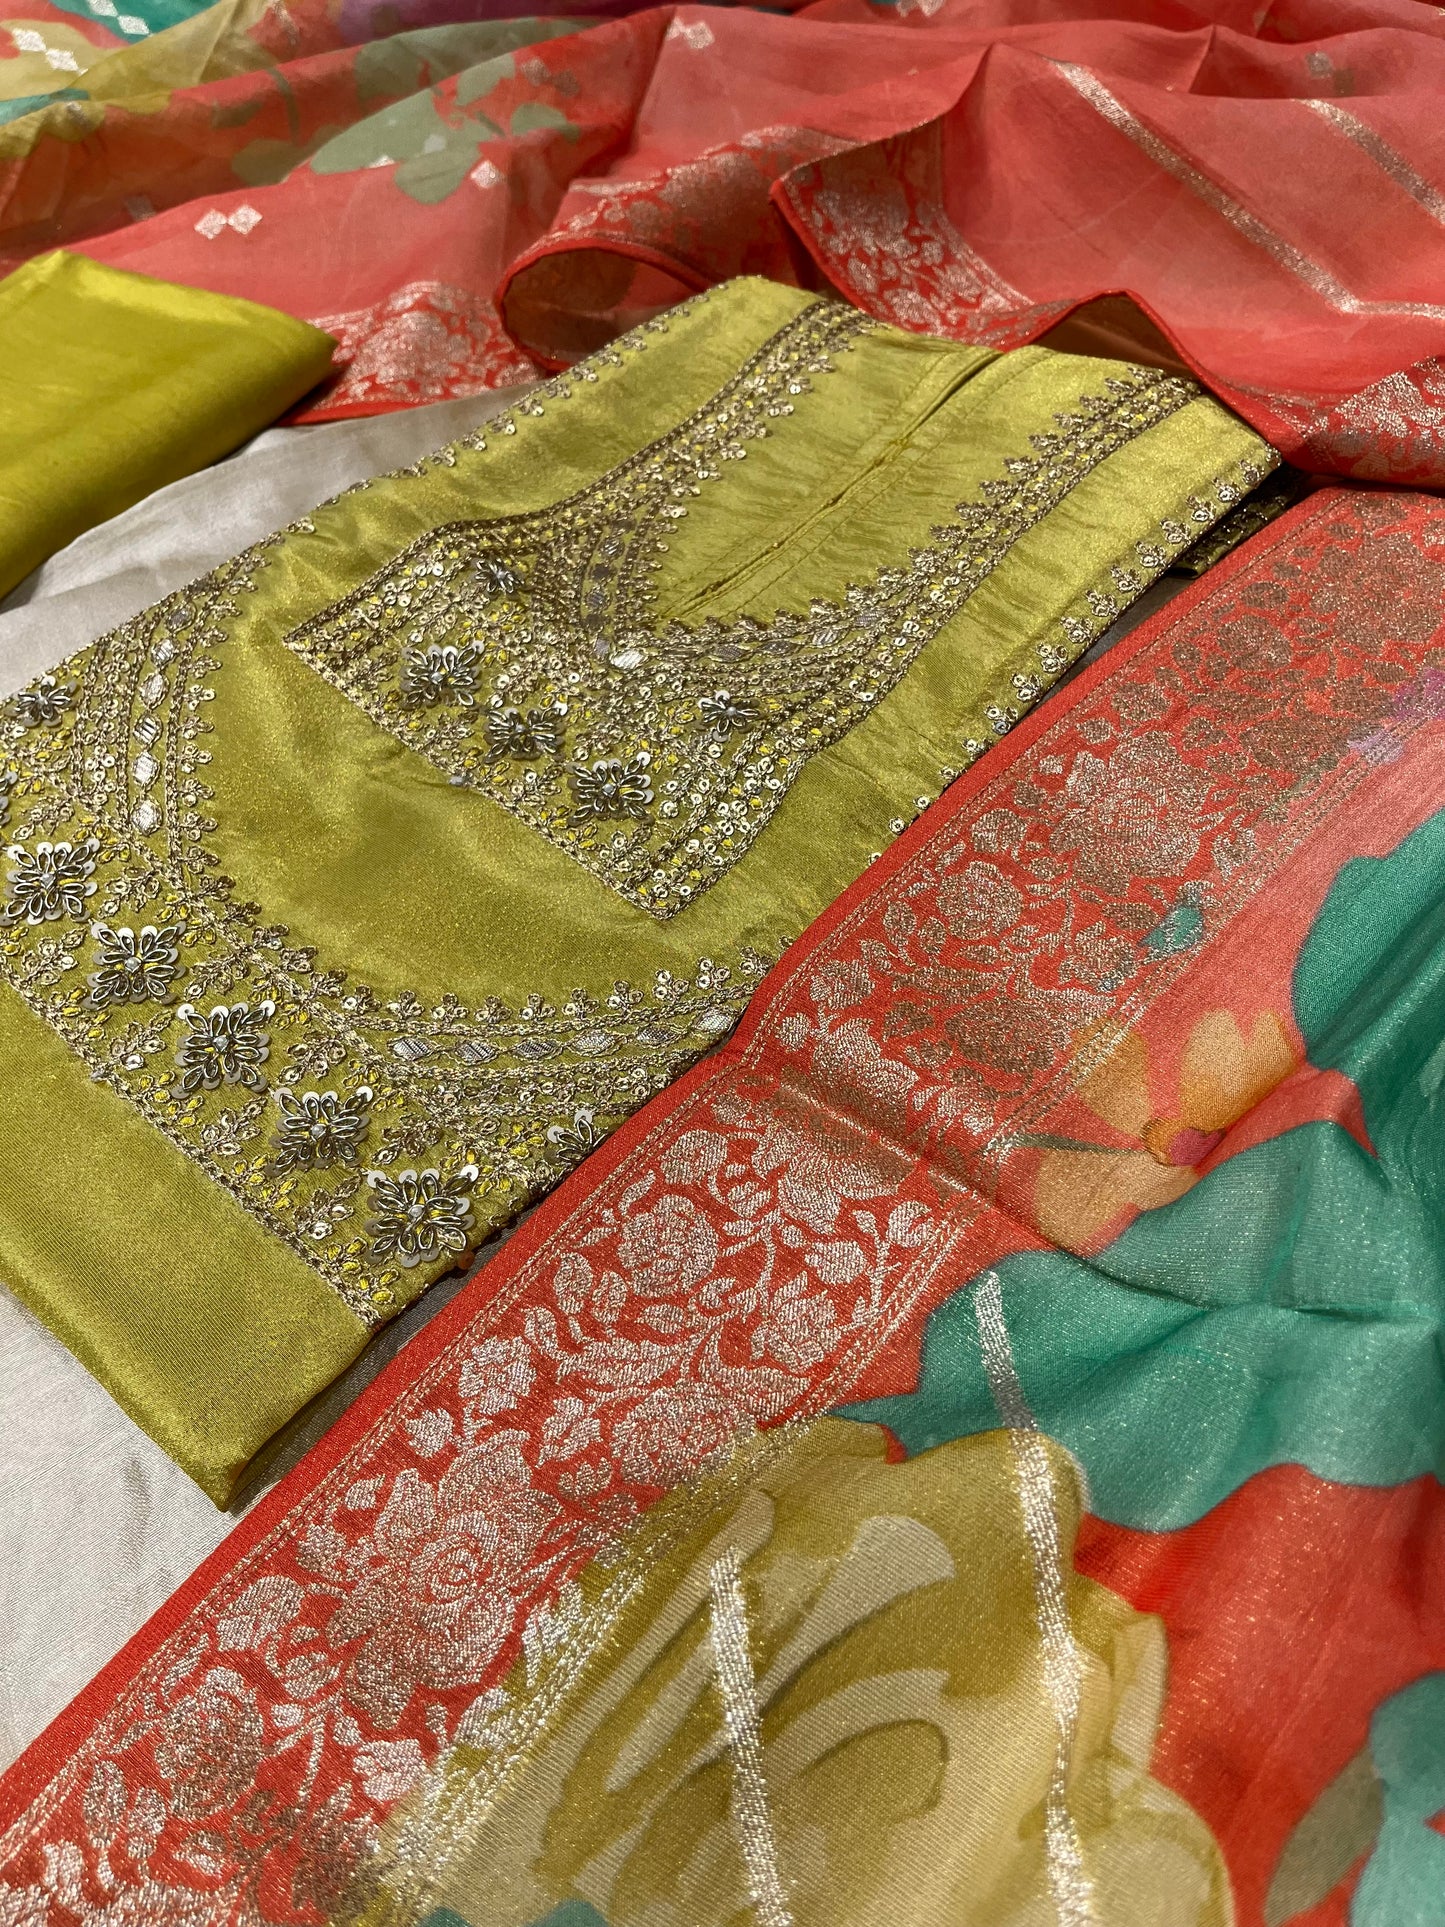 GREEN COLOUR CREPE TISSUE UNSTITCHED SUIT WITH ORGANZA DUPATTA EMBELLISHED WITH ZARDOZI & SEQUINS WORK